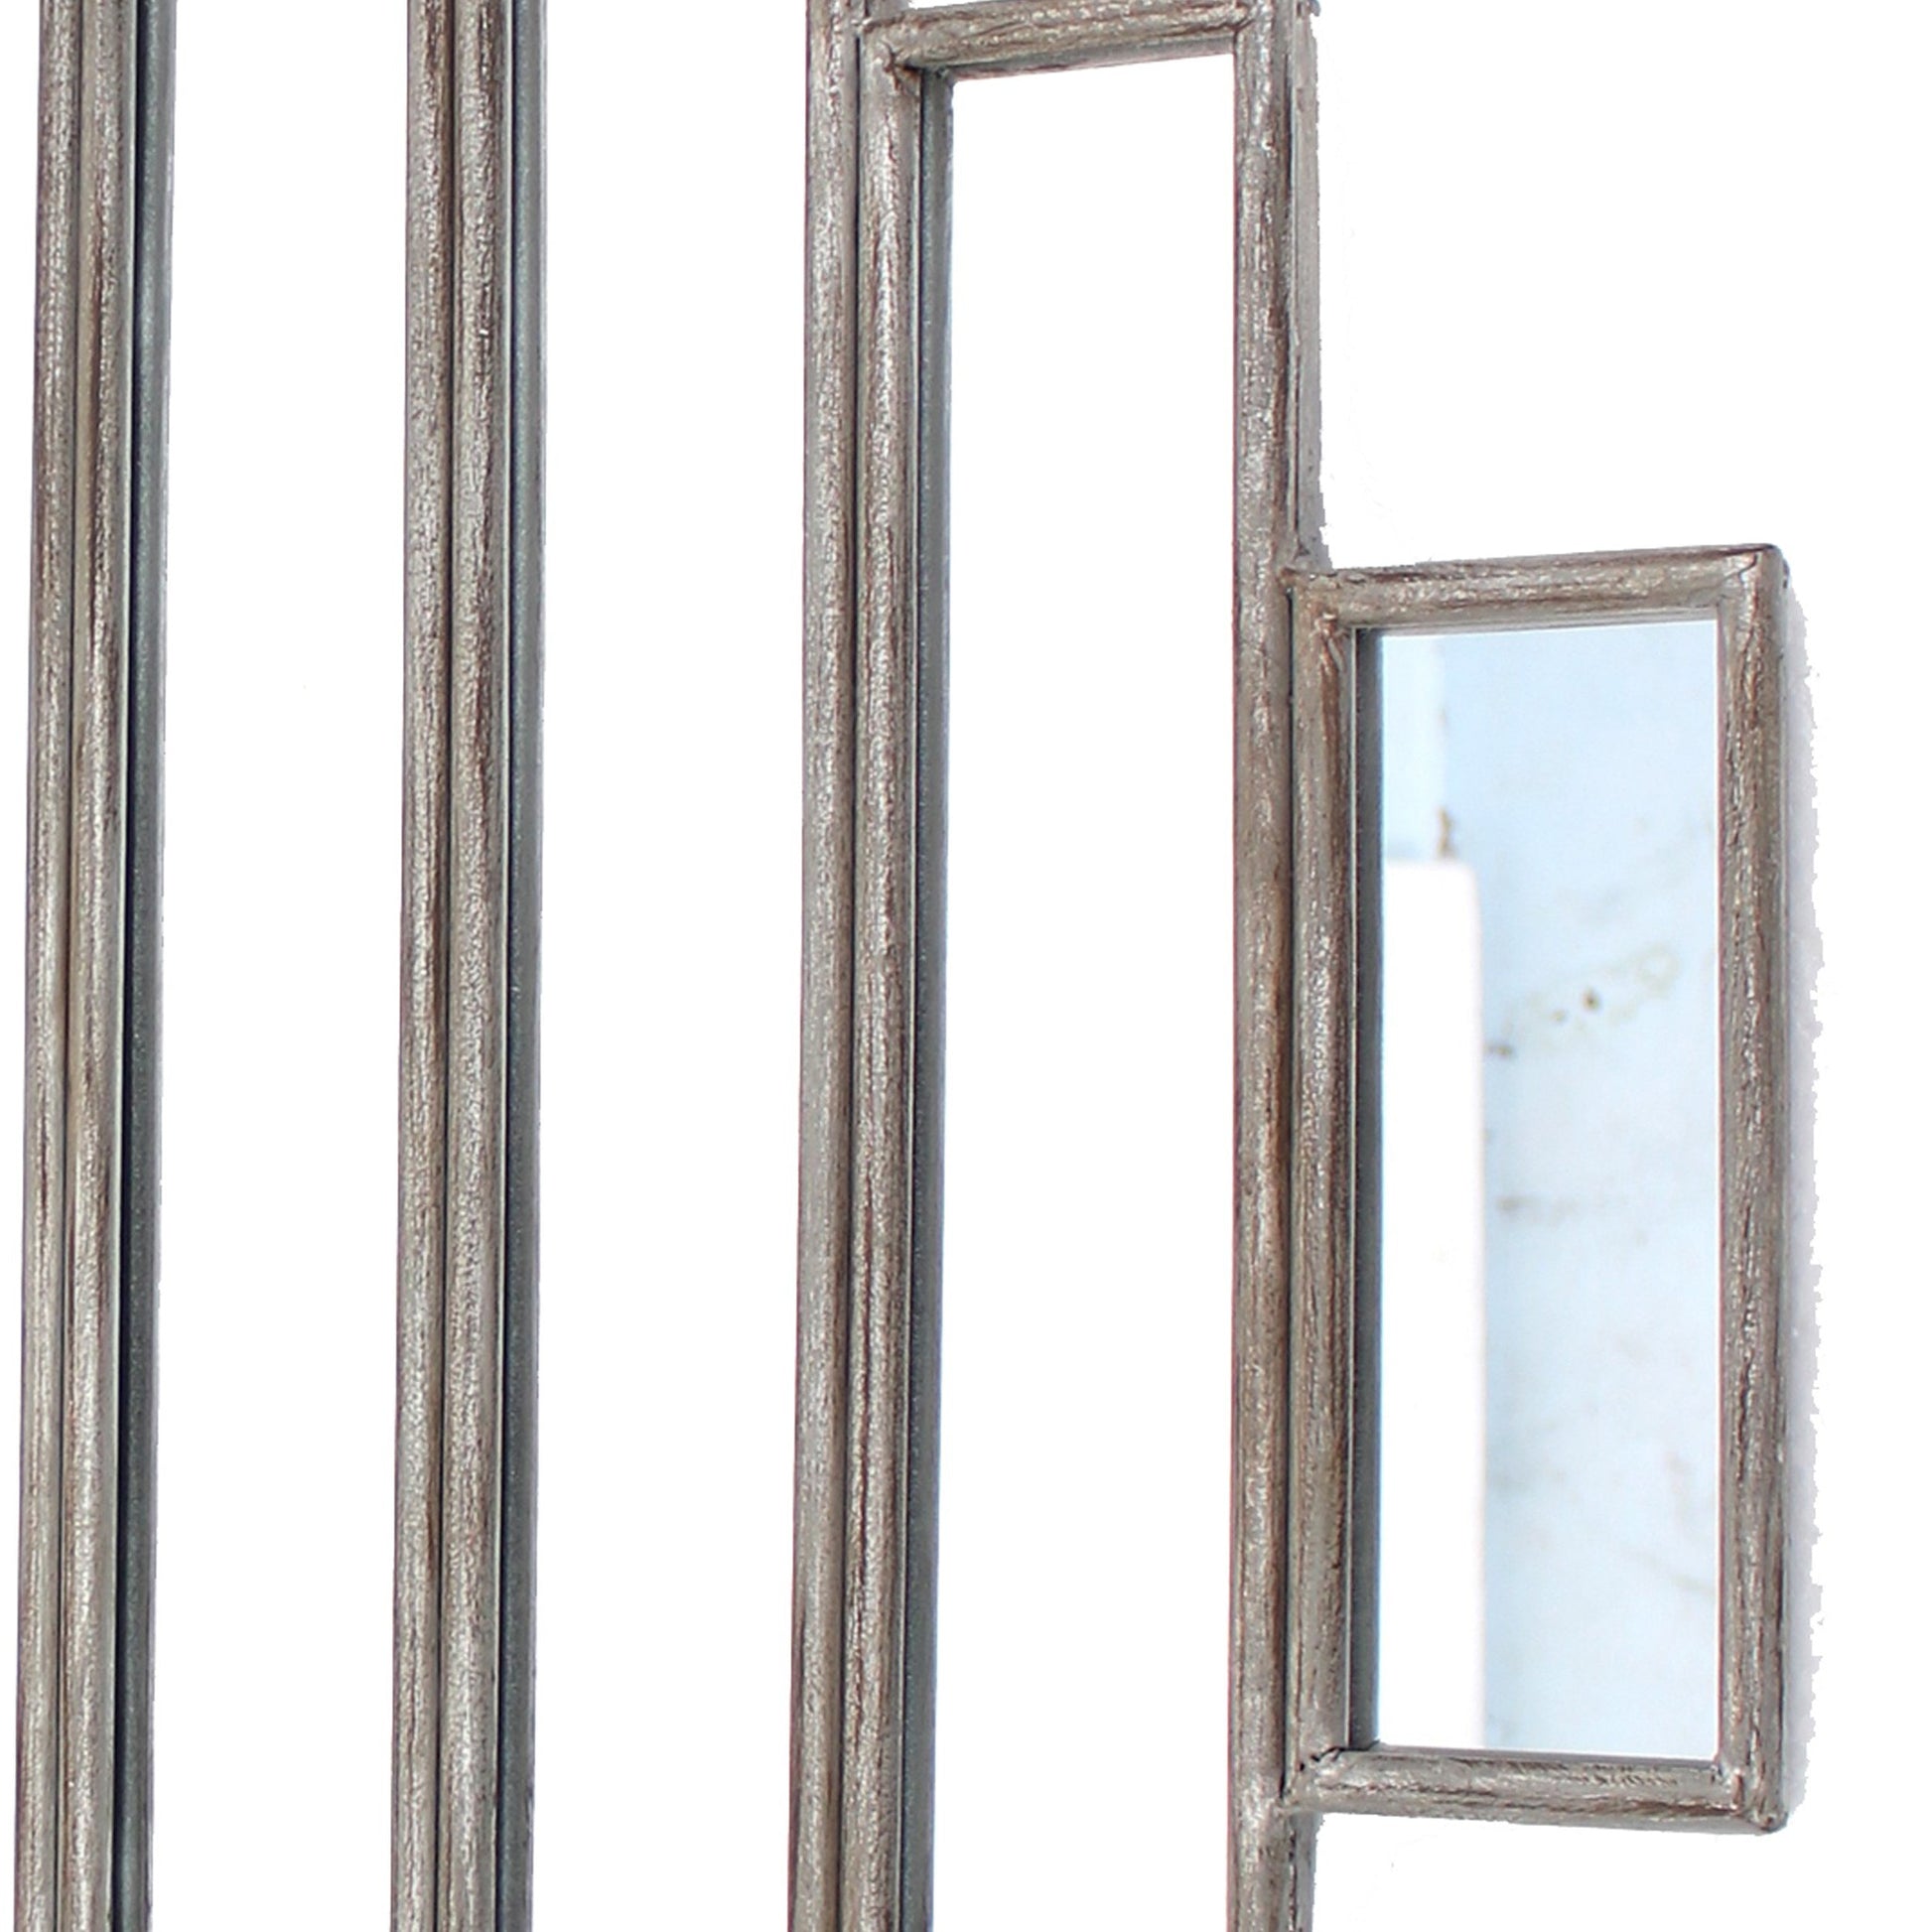 Benzara Silver Wooden Wall Mirror With Multiple Framed Sculptures